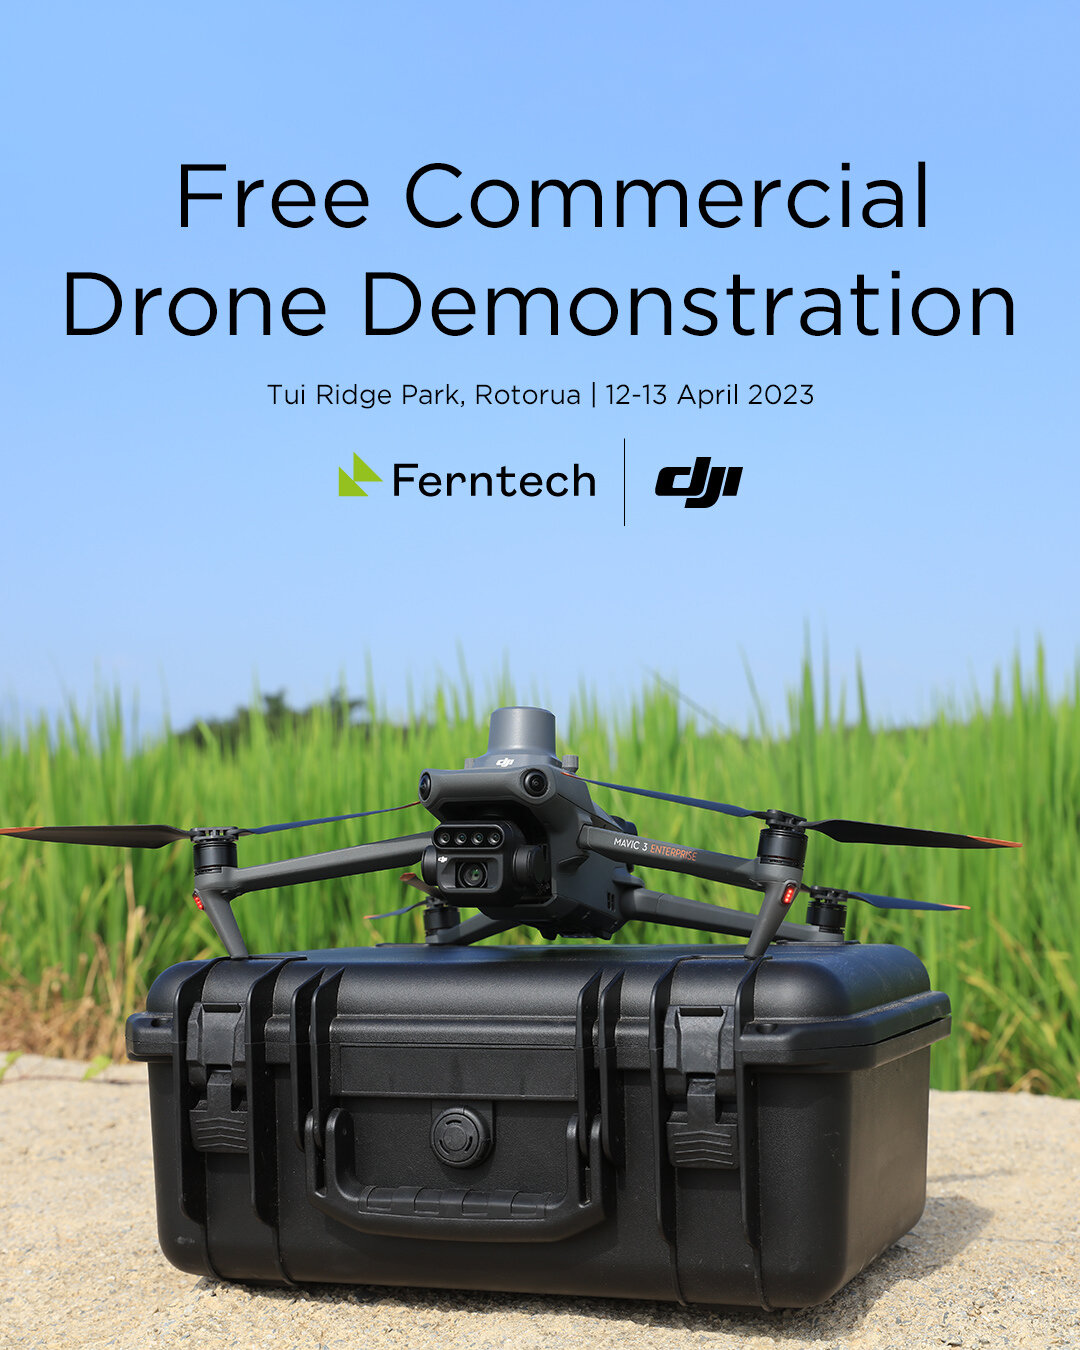 What are the commercial advantages of drones, and how can you use them for your own applications? Join our expert team in Rotorua on April 12th or 13th for in-depth discussions and live demonstrations of our latest DJI drones! Register now via the ev